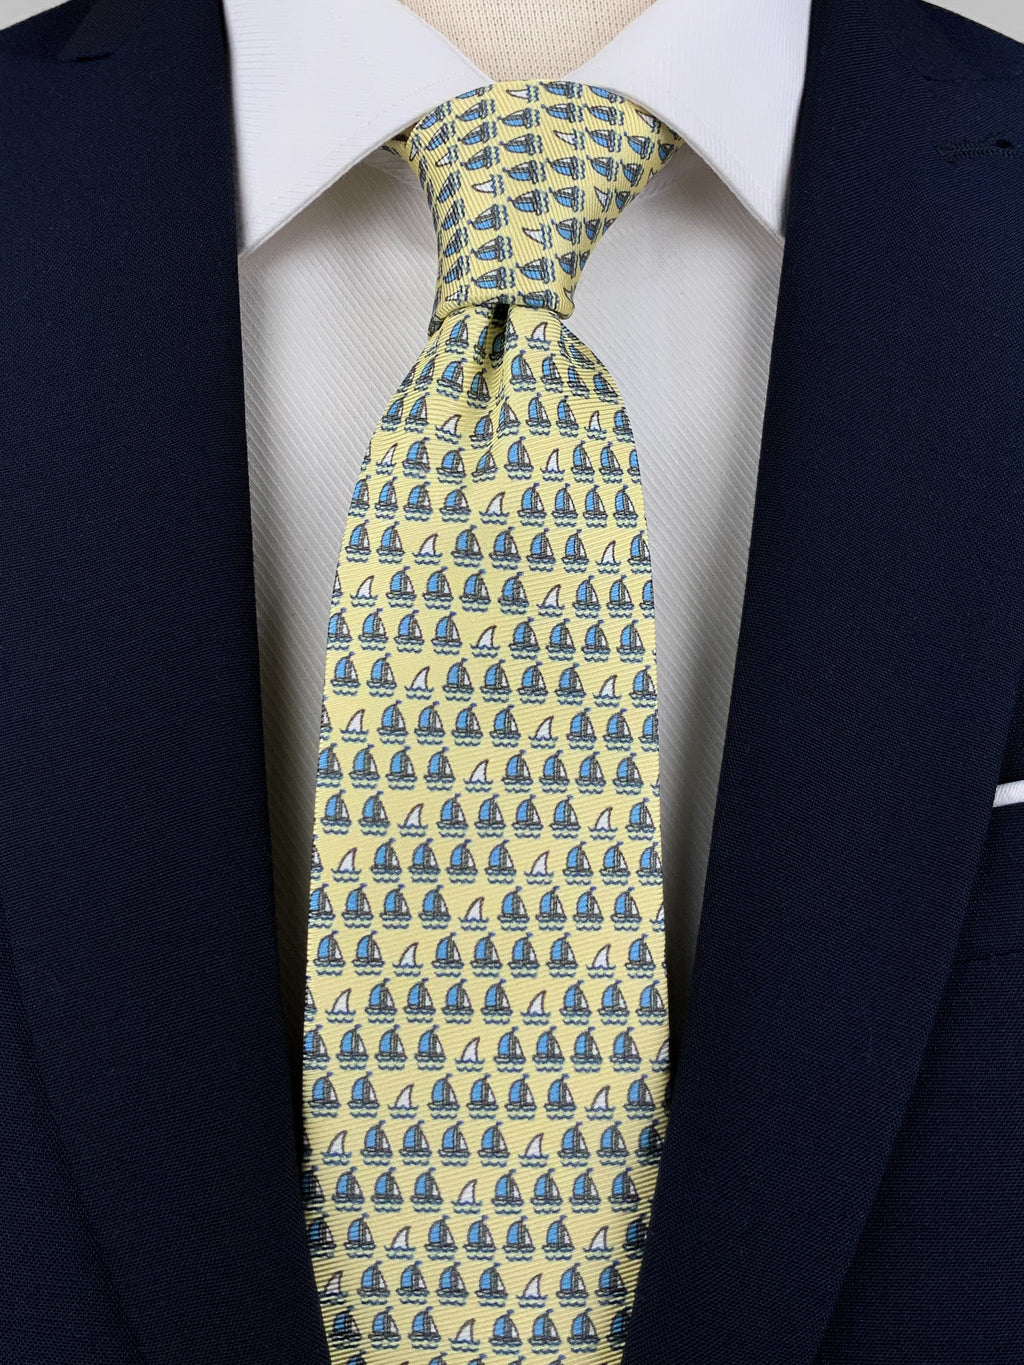 Mulberry silk twill tie in a lime yellow color with a blue microprint of ships and fish worn with a white shirt and a navy blue suit